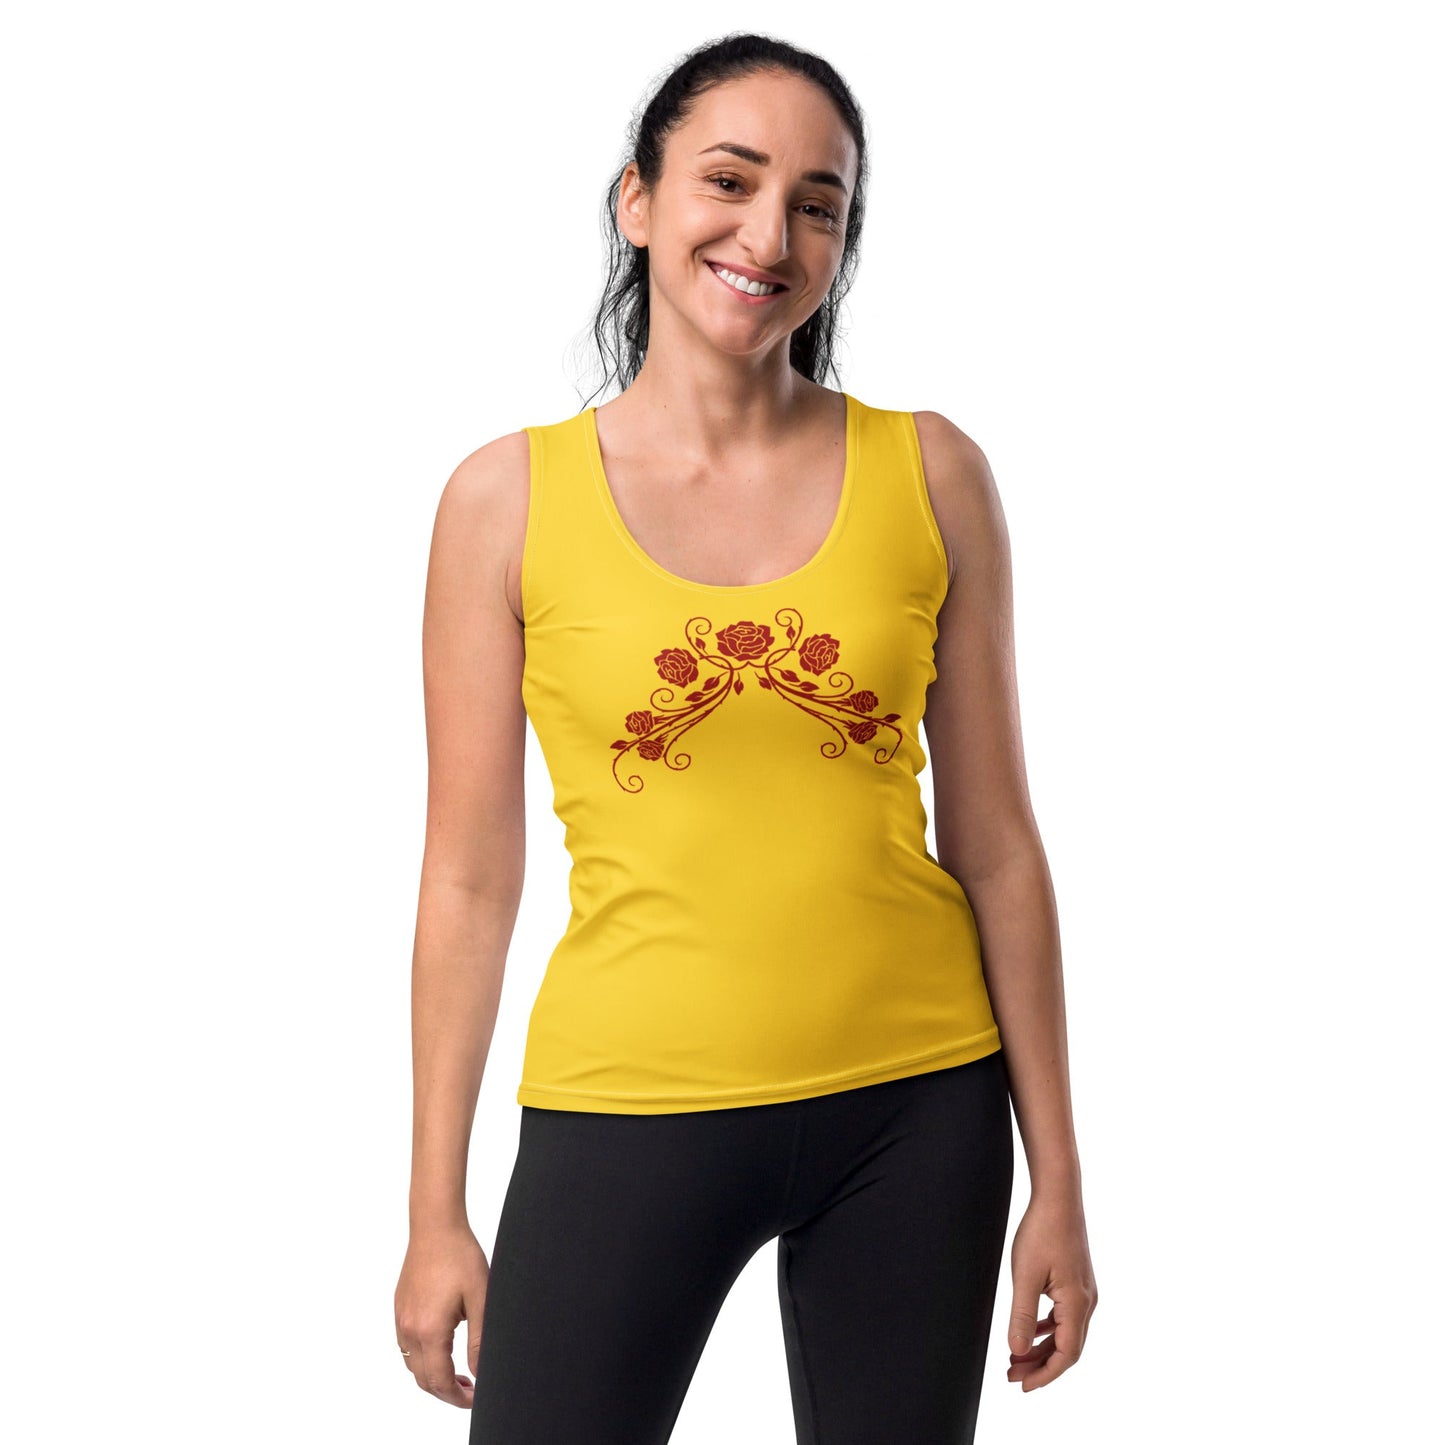 The Belle Inspired Rose Tank Top 90s movieadult disney princessAdult T-ShirtWrong Lever Clothing